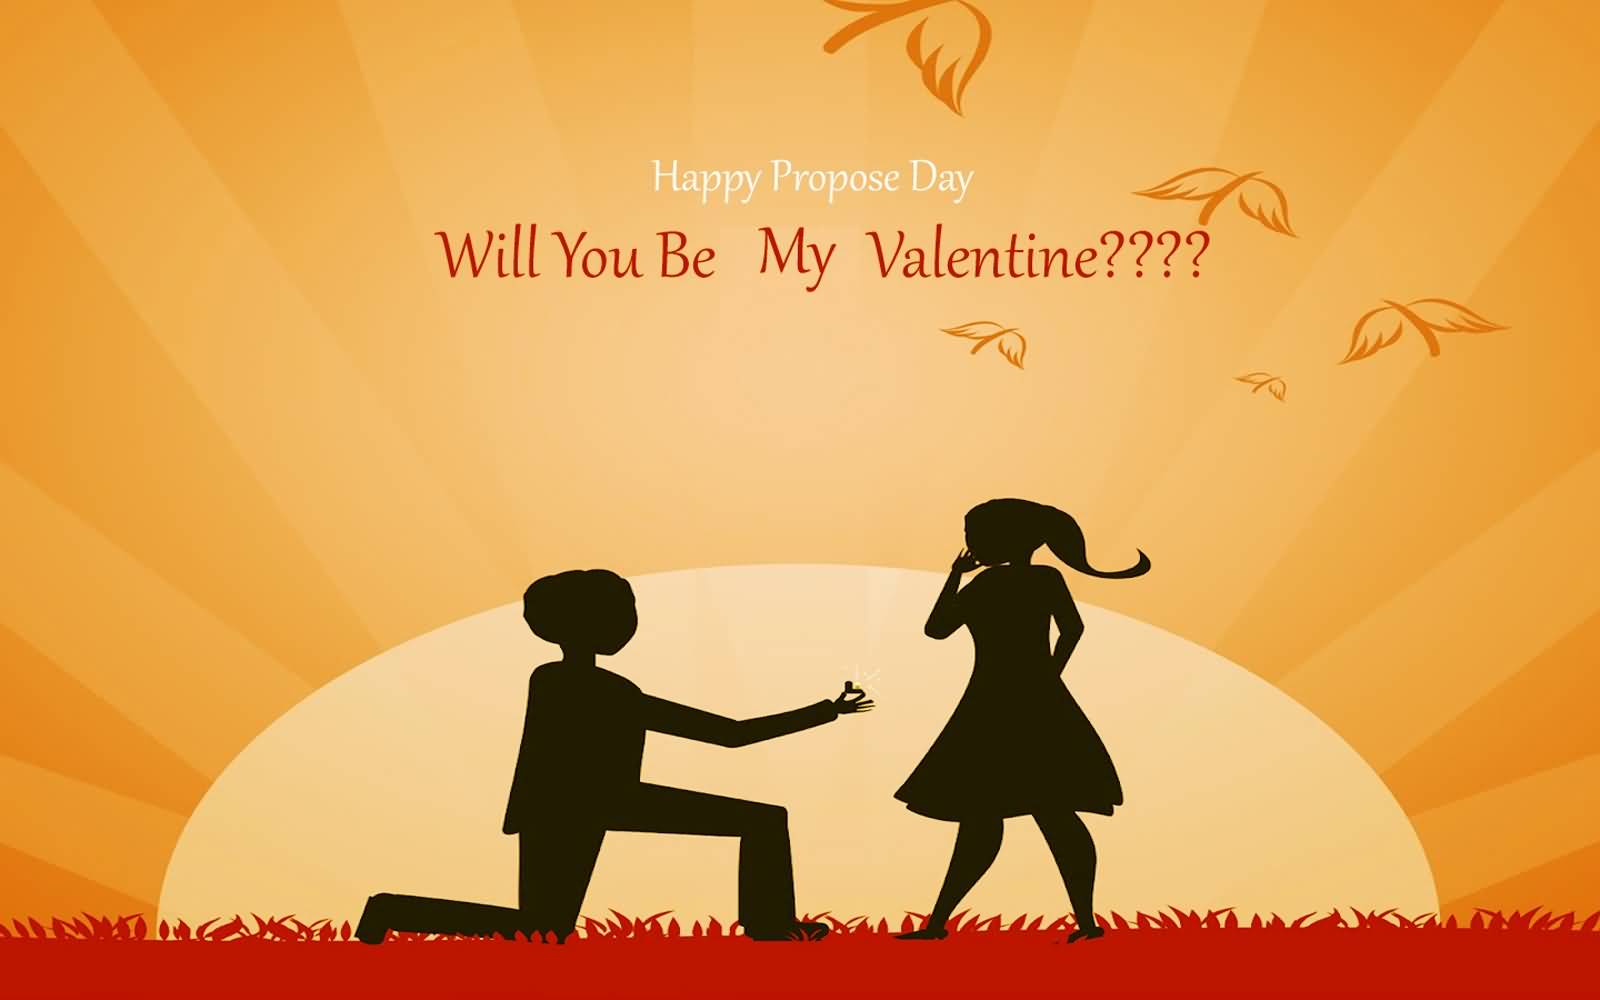 Happy Propose Day Will You Be My Valentine Greeting Card